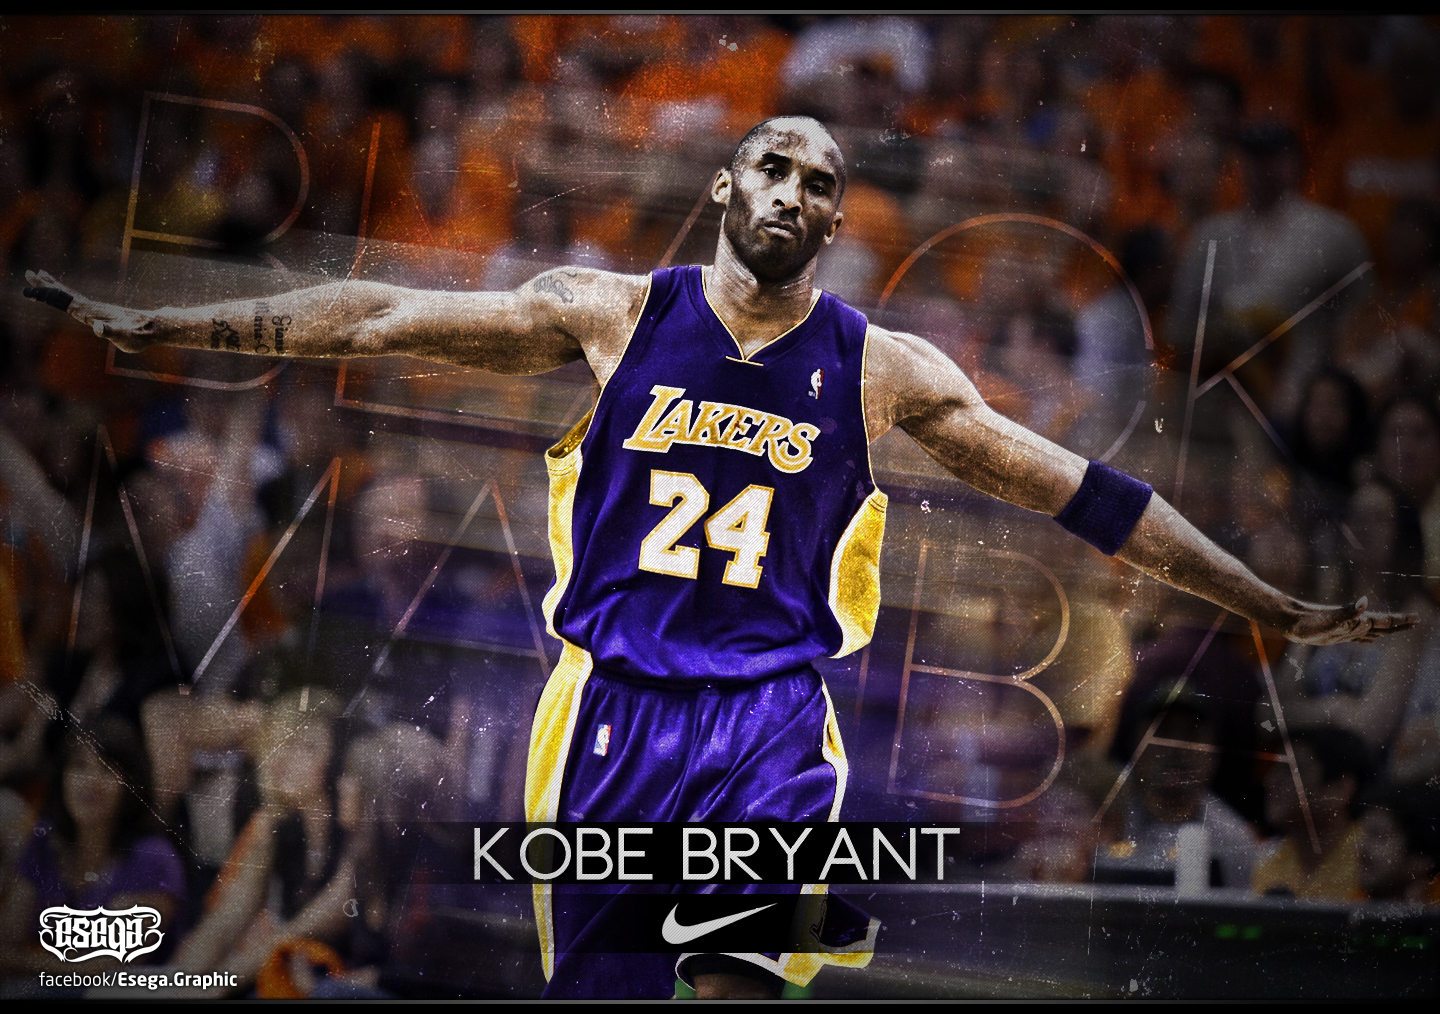 Mobile wallpaper Sports Basketball Nba Kobe Bryant Los Angeles Lakers  478073 download the picture for free